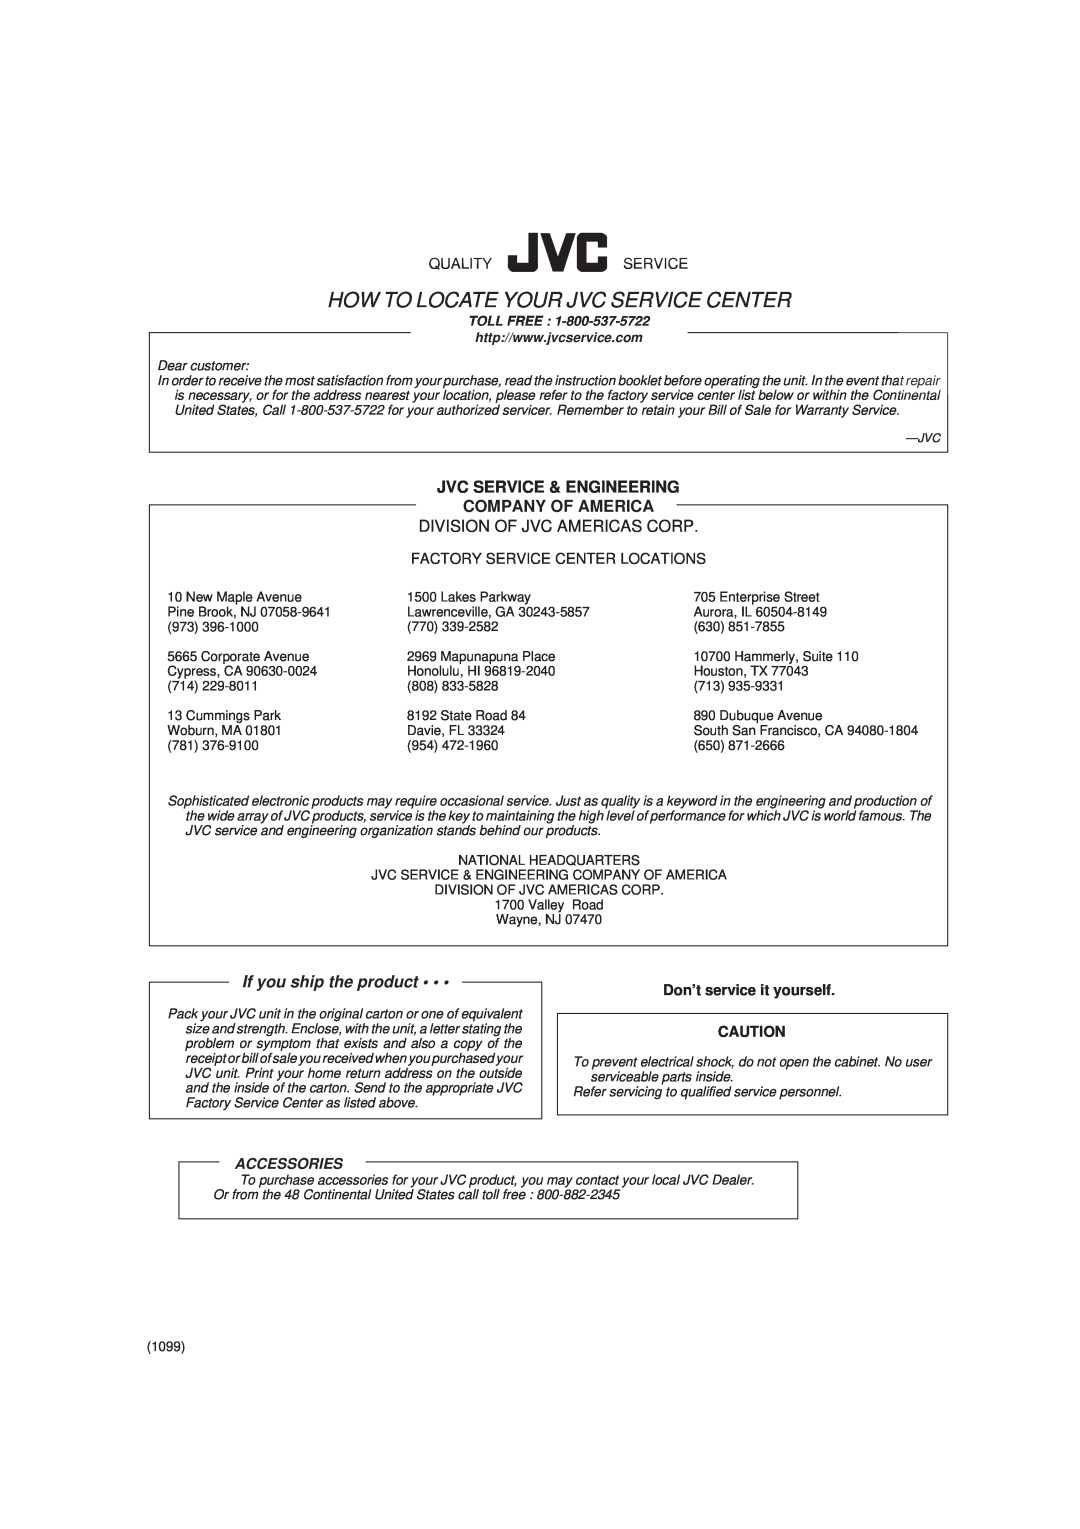 JVC RX-6018VBK manual Jvc Service & Engineering Company Of America, How To Locate Your Jvc Service Center, Qualityservice 